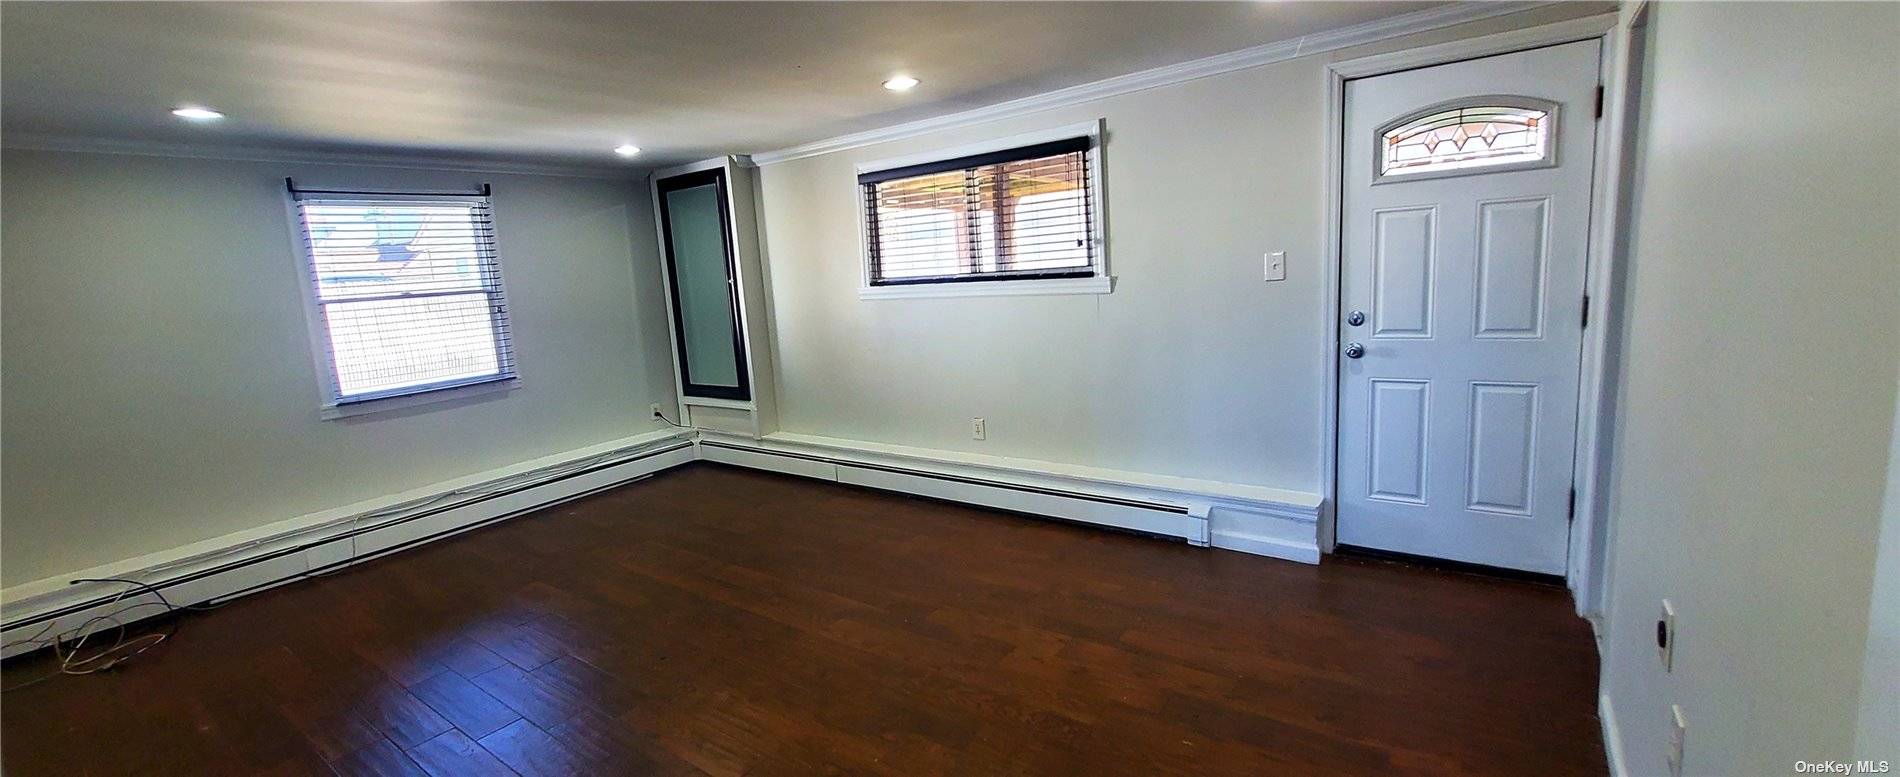 Gorgeous Newly Renovated home features beautiful Kitchen, Hardwood Floors, Crown moldings.